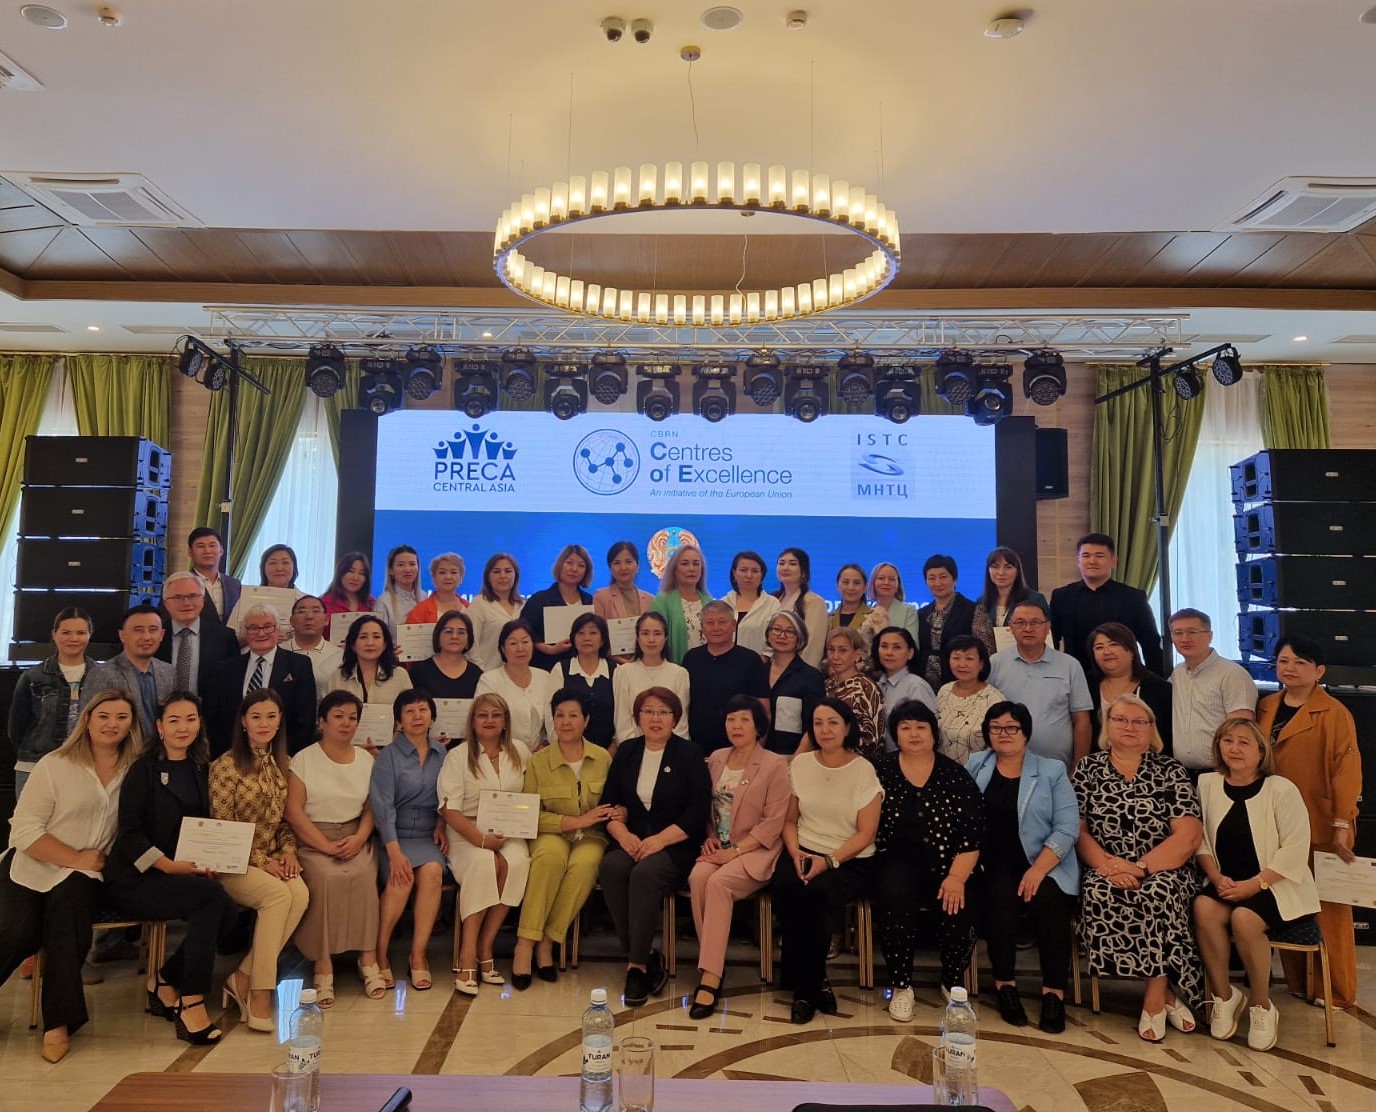 “Preparedness and Response for Mass Gatherings and Other Health Threats in Central Asia” (PRECA) national training was organized in Borovoe (Kazakhstan)